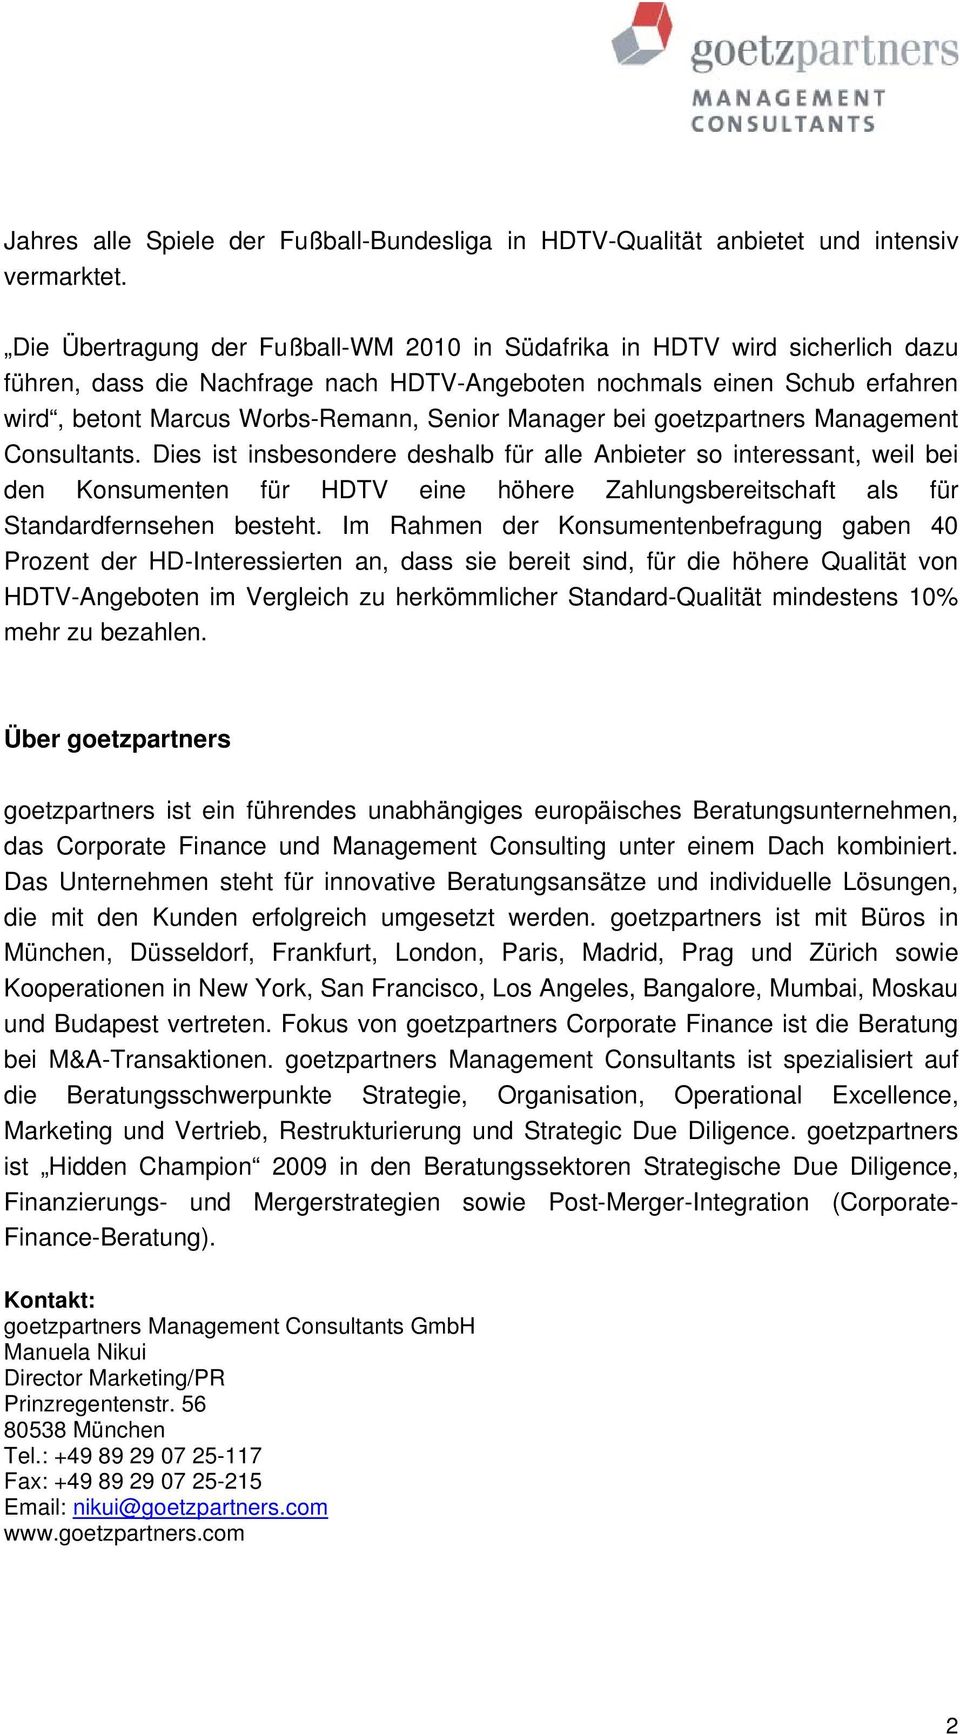 Manager bei goetzpartners Management Consultants.